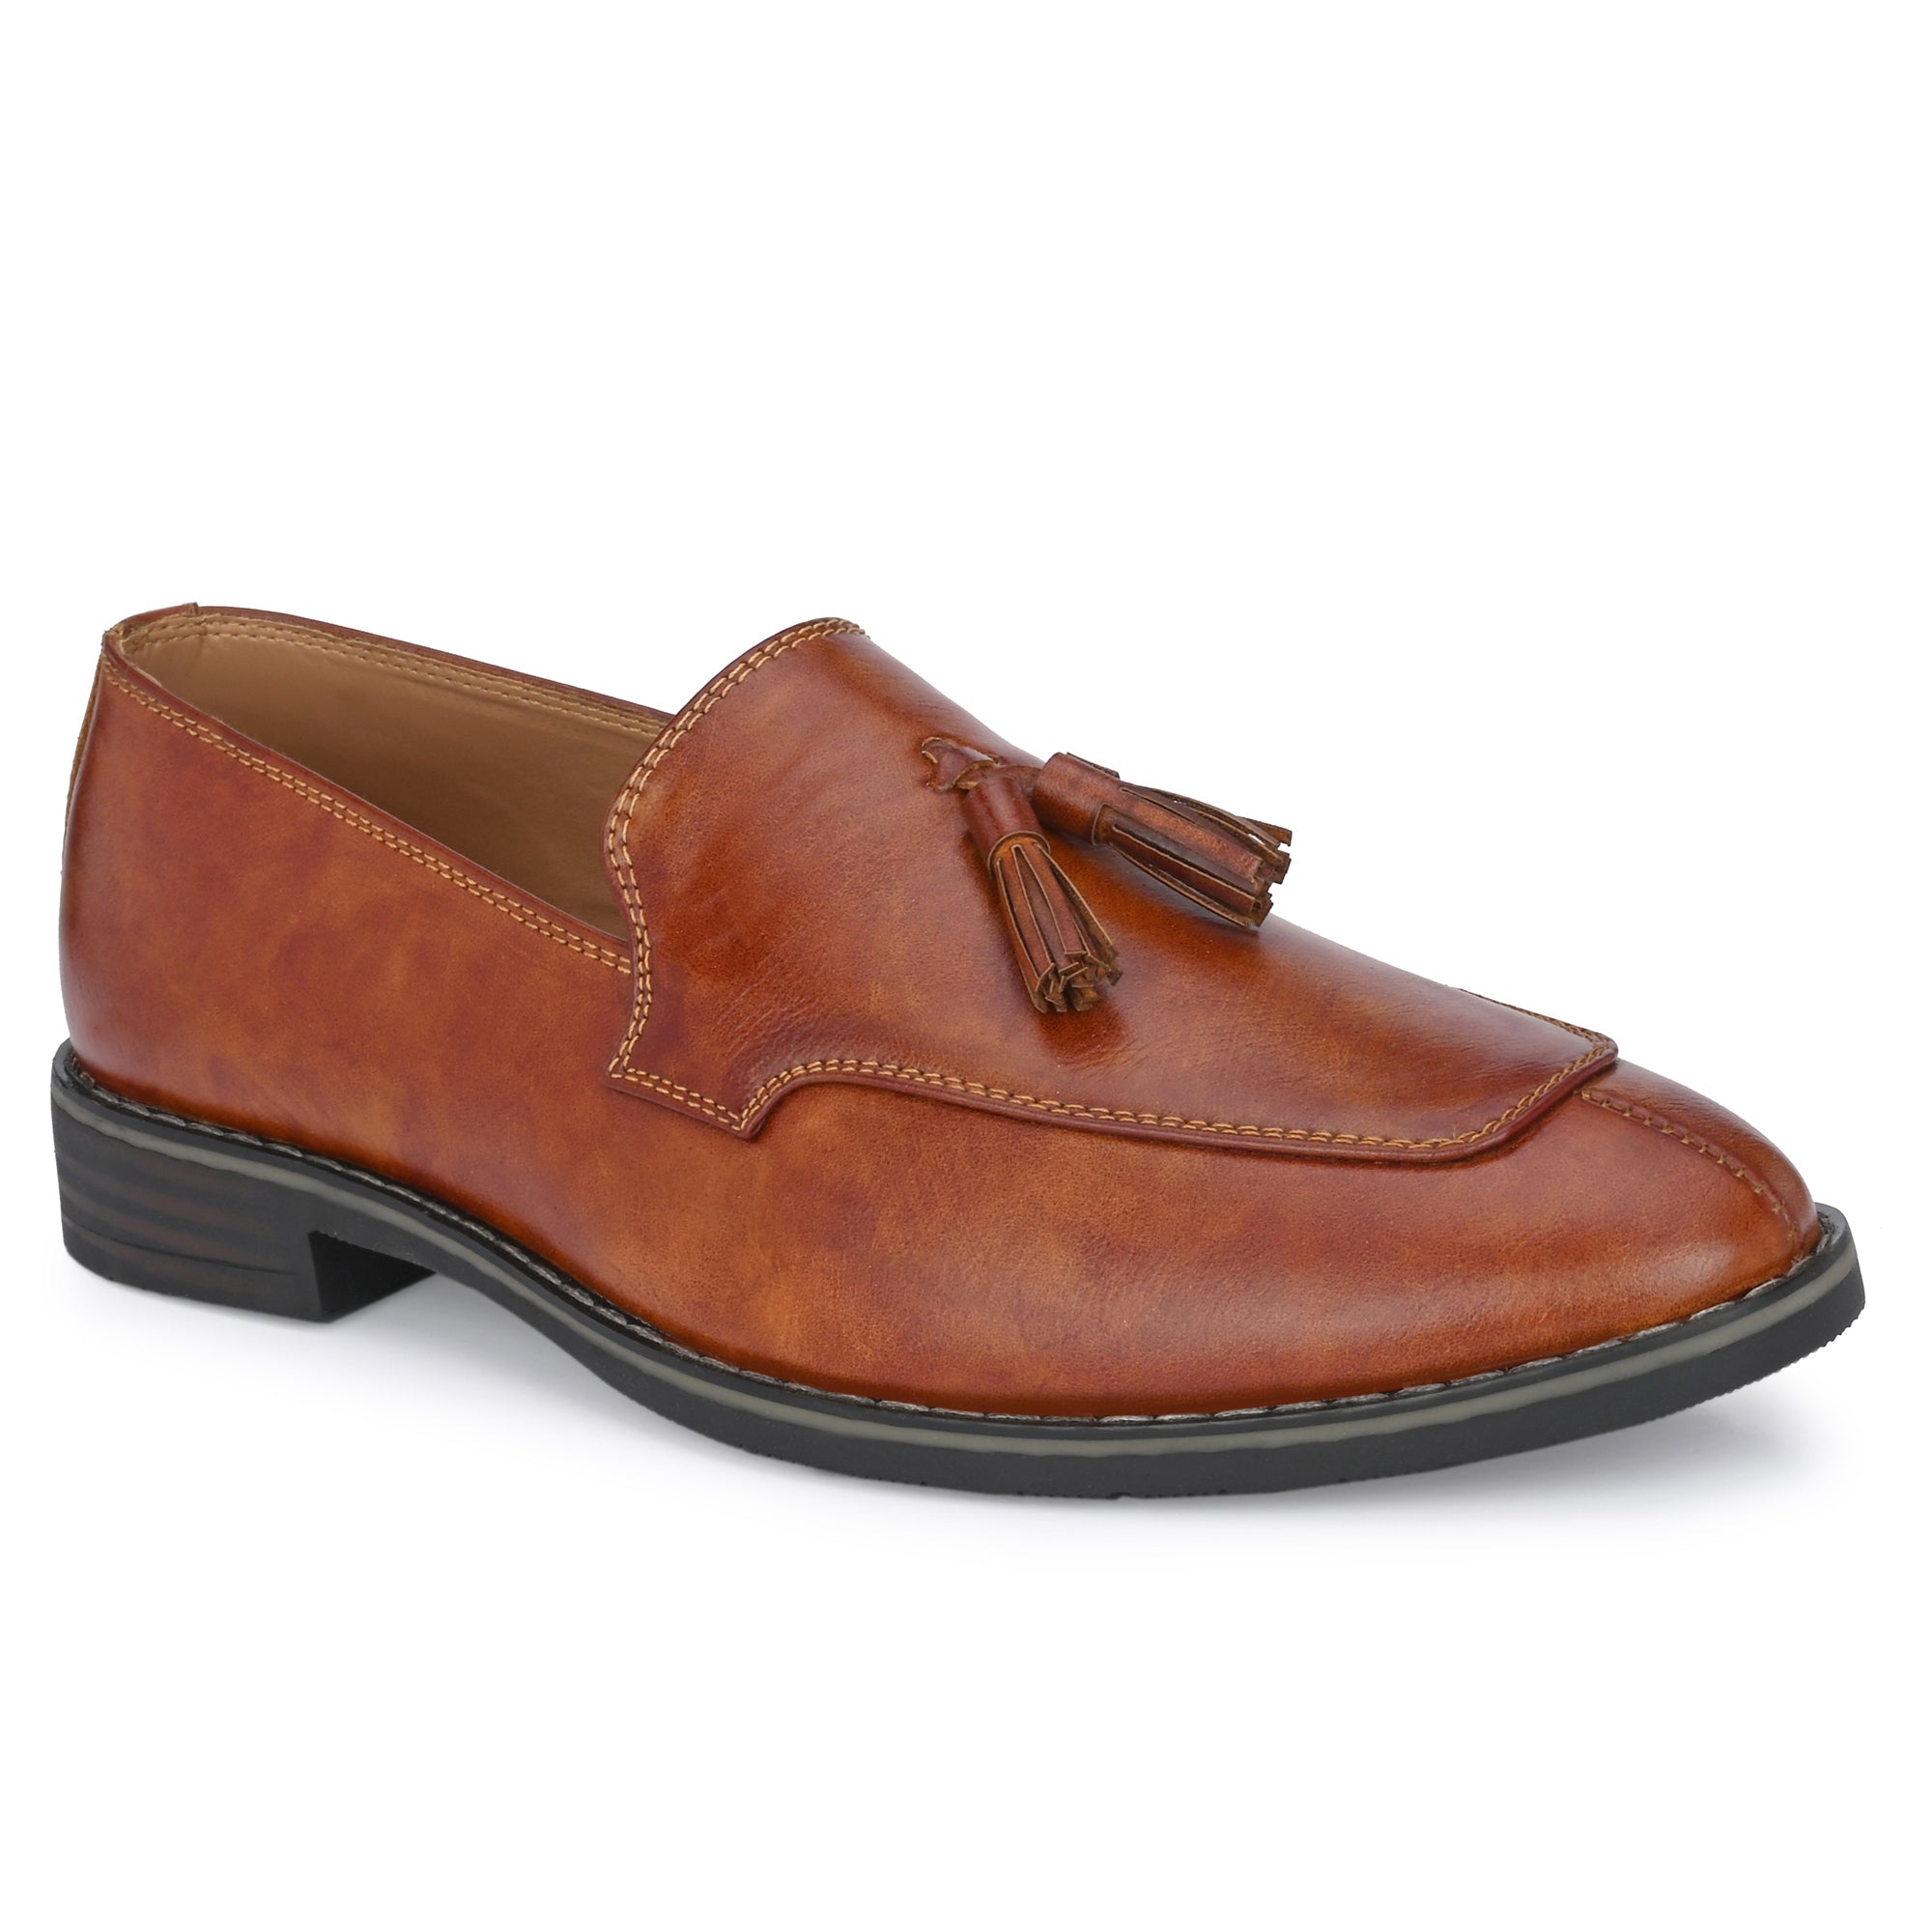 tan-loafers-attitudist-shoes-for-men-with-tassel-sp13c